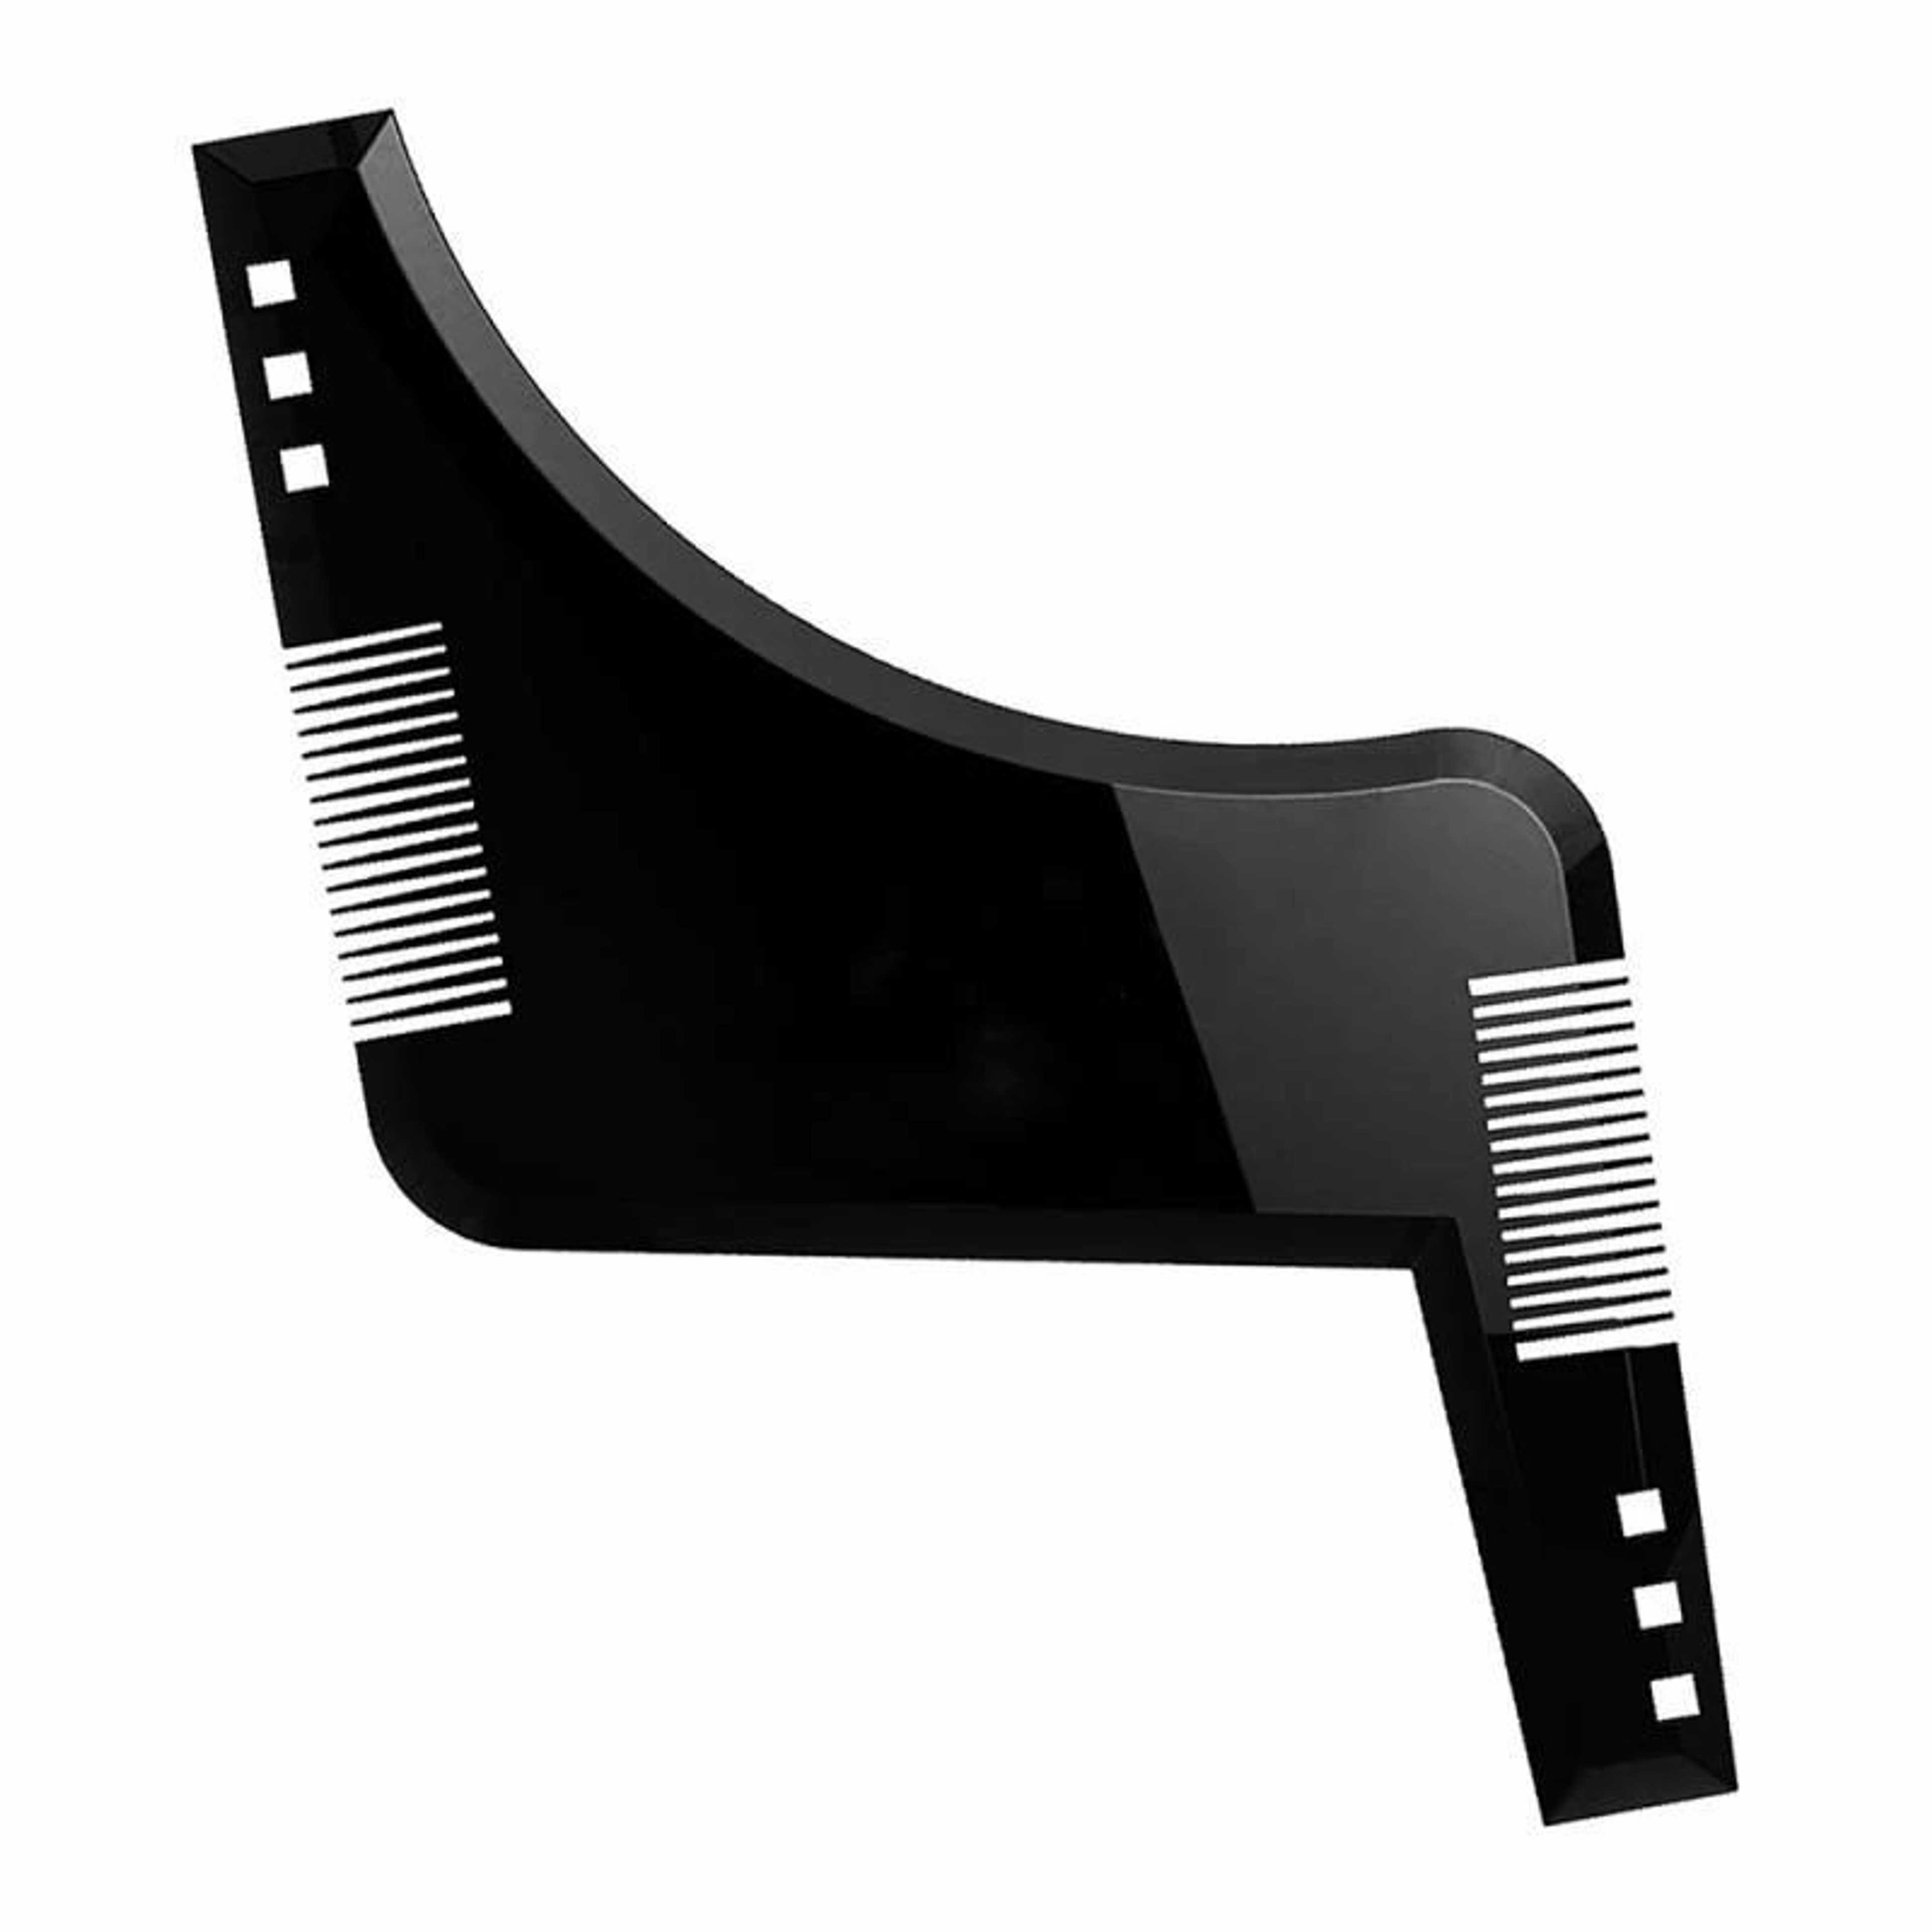 Double Side Beard Shaping BEARD SHAPER PLUS Comb For Line Up and Men Bread Comb
